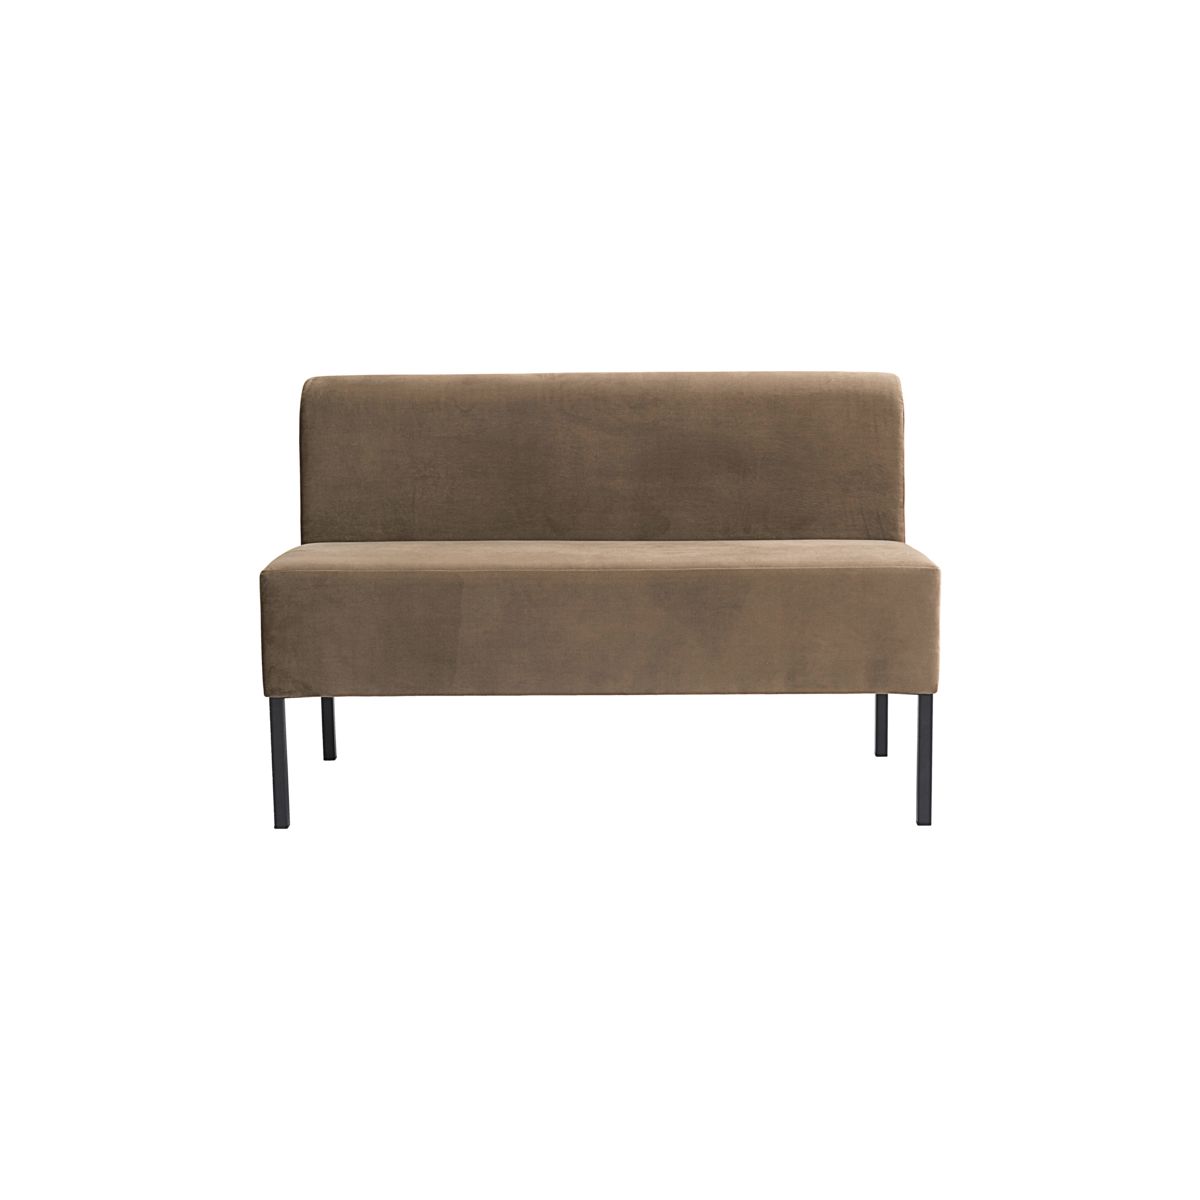 House Doctor - Soffa, 2 seater, Sand